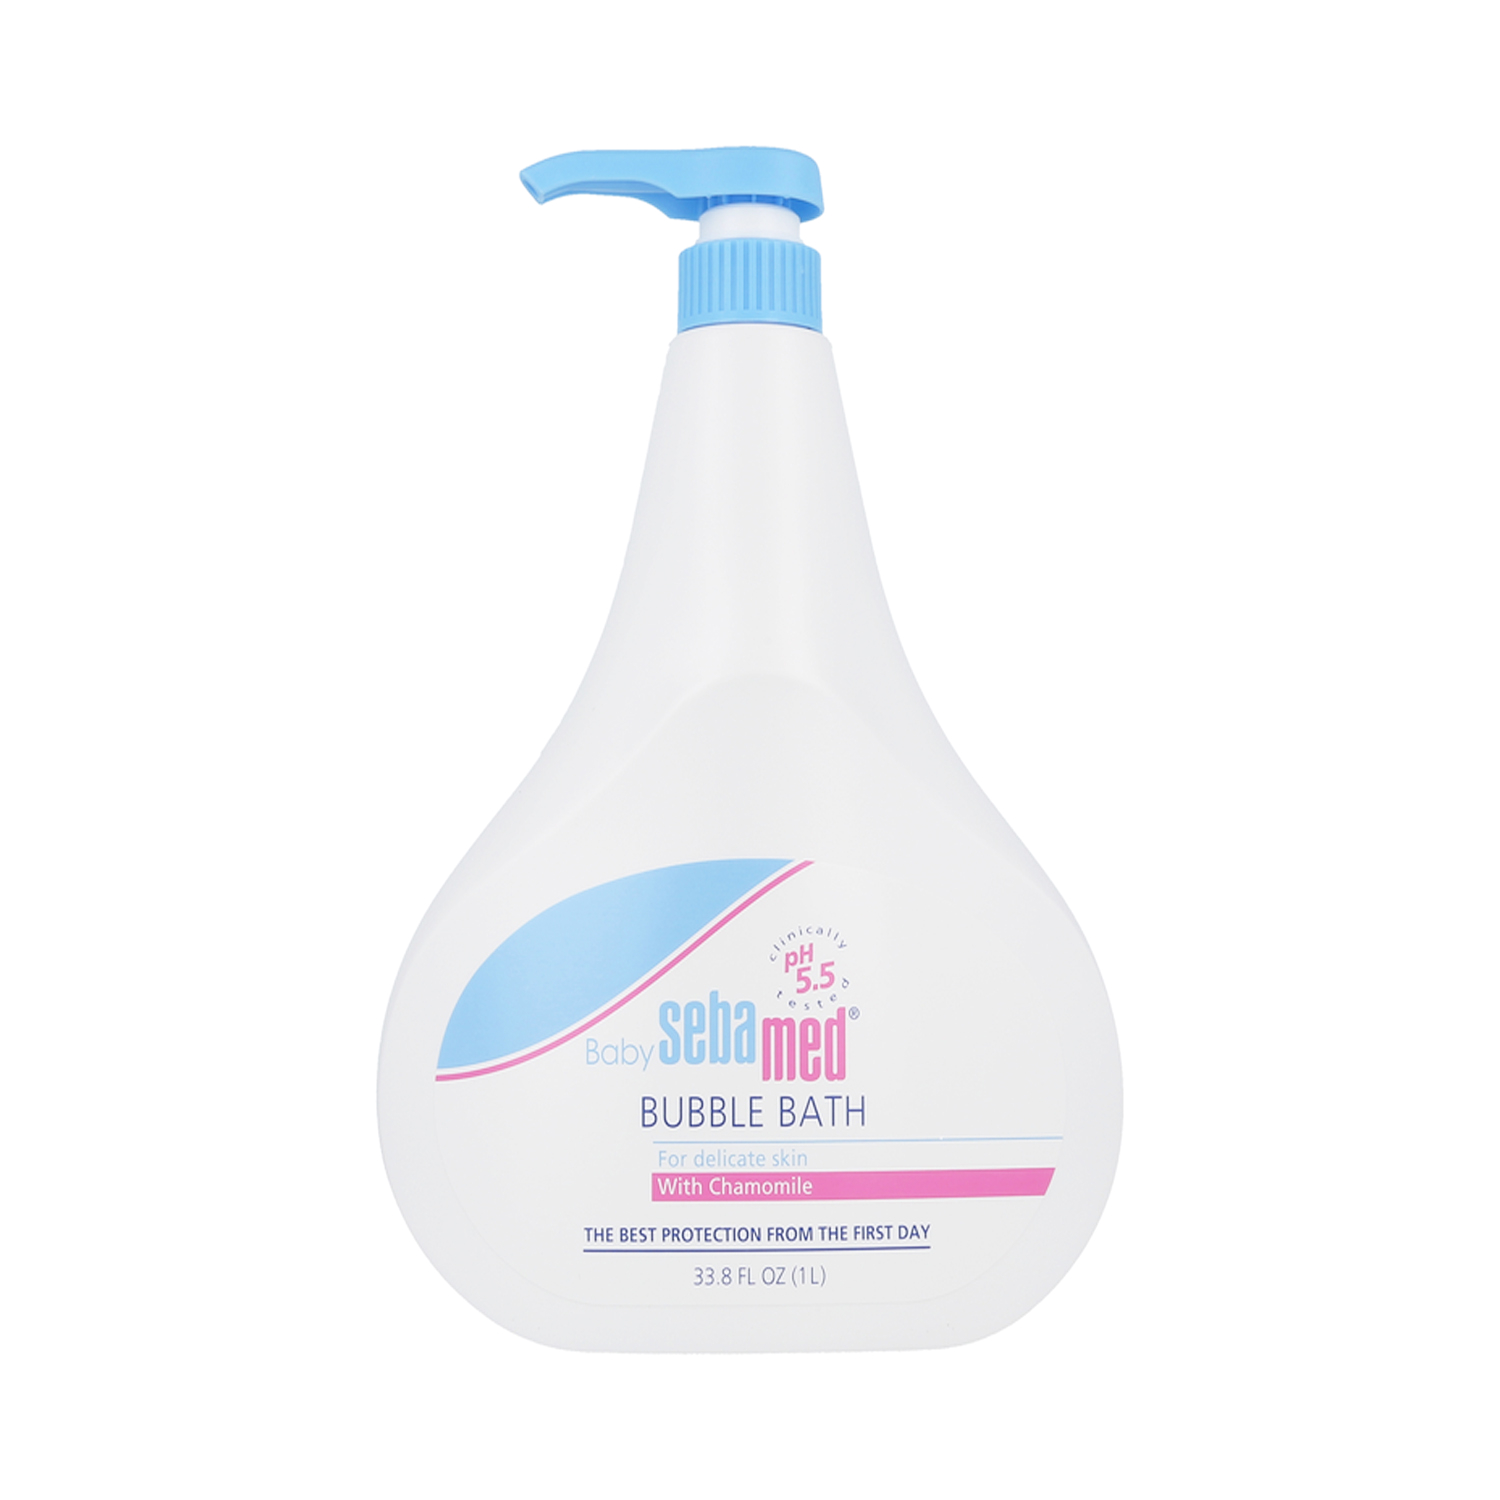 sebamed baby bubble bath for delicate skin with camomile 1litre